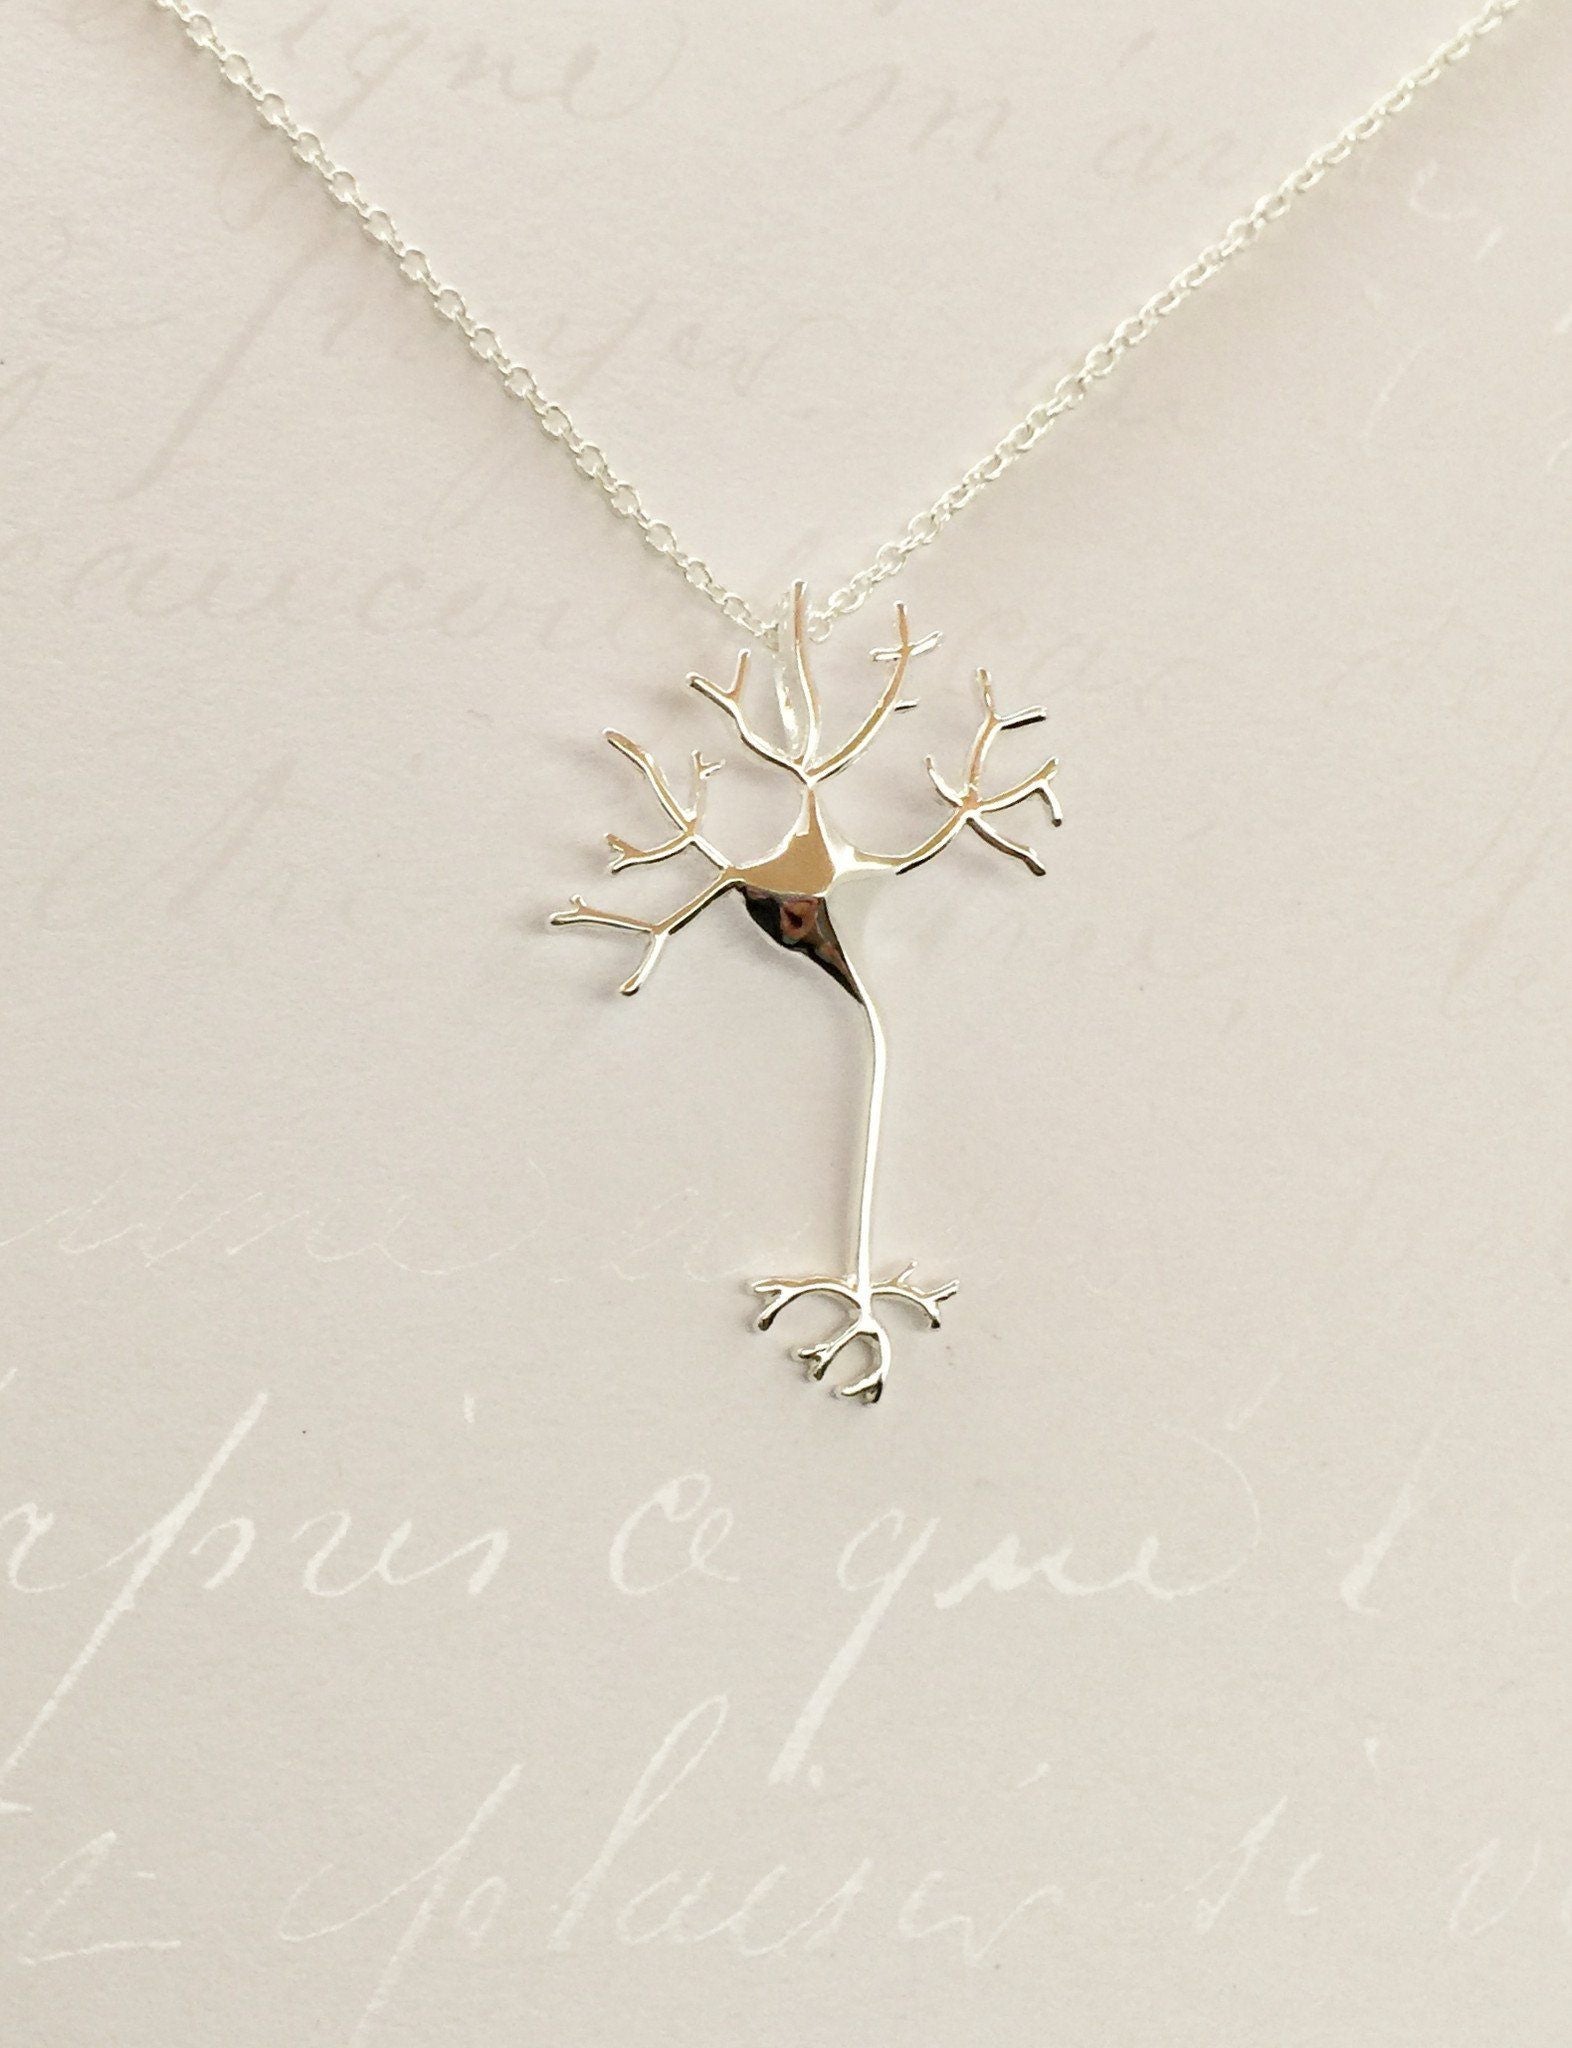 Neuron Necklace - Anomaly Creations & Designs